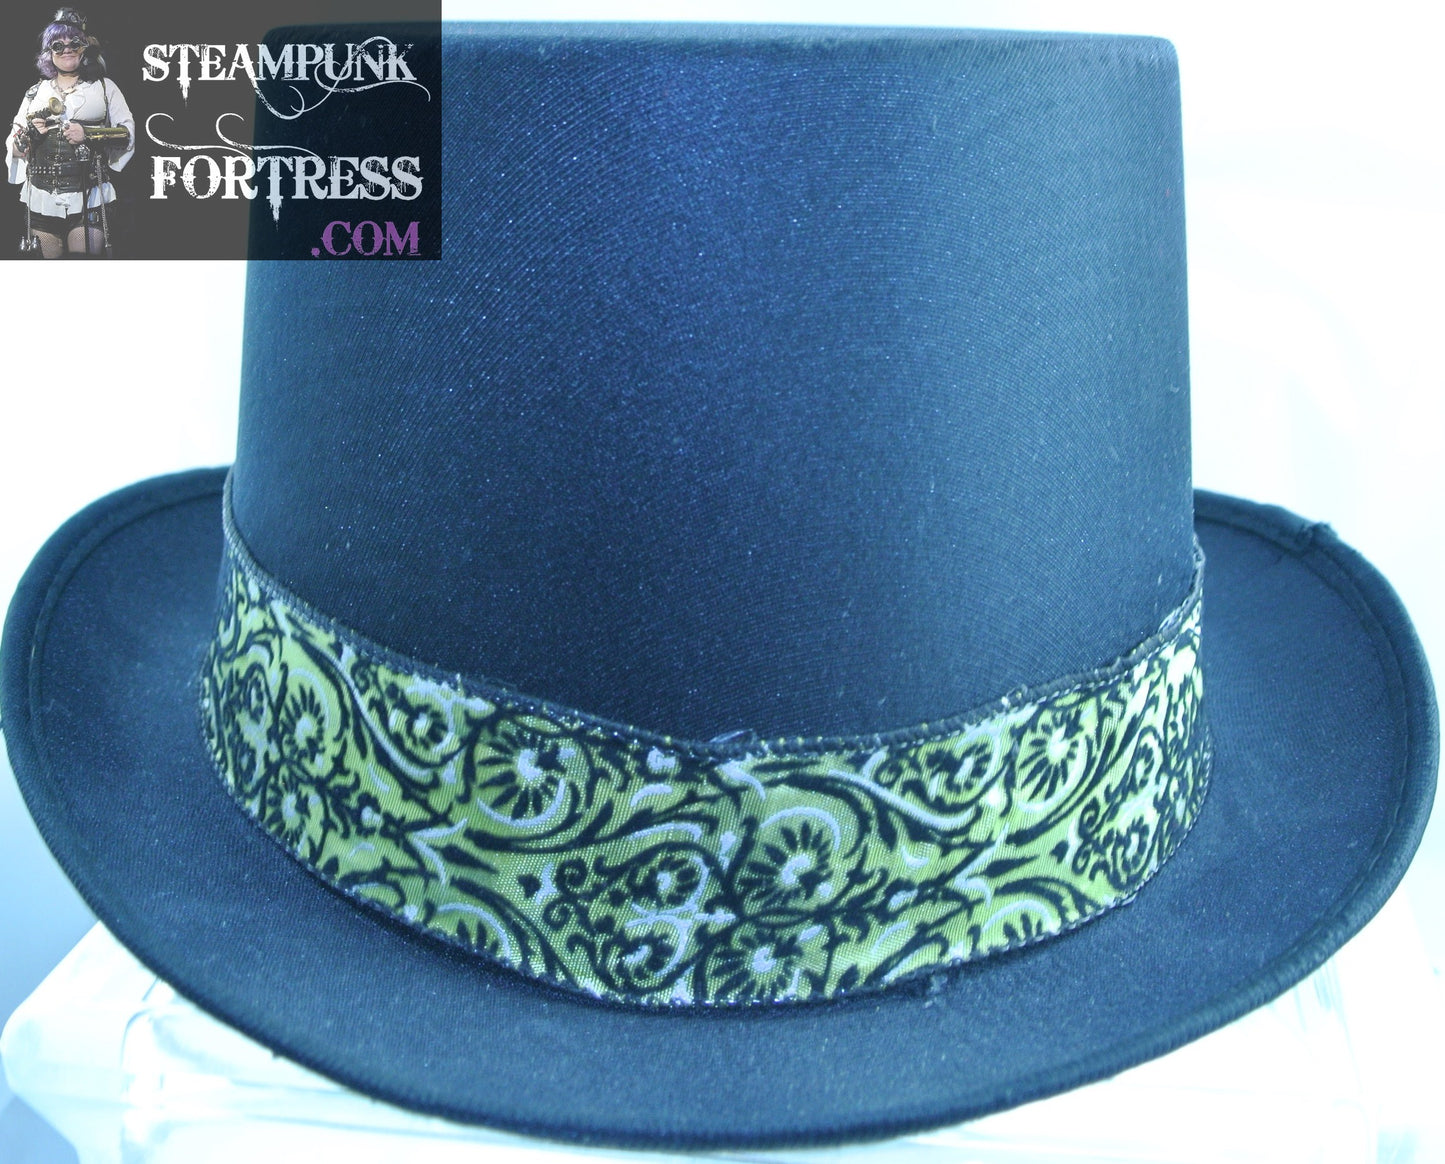 BLACK SATIN GREEN BLACK FLOCKED RIBBON BAND EXTRA LARGE XL SATIN MINIMALIST FULL SIZE TOP HAT GREAT CREATE BUILD YOUR OWN STEAMPUNK HAT BASE STARR WILDE STEAMPUNK FORTRESS